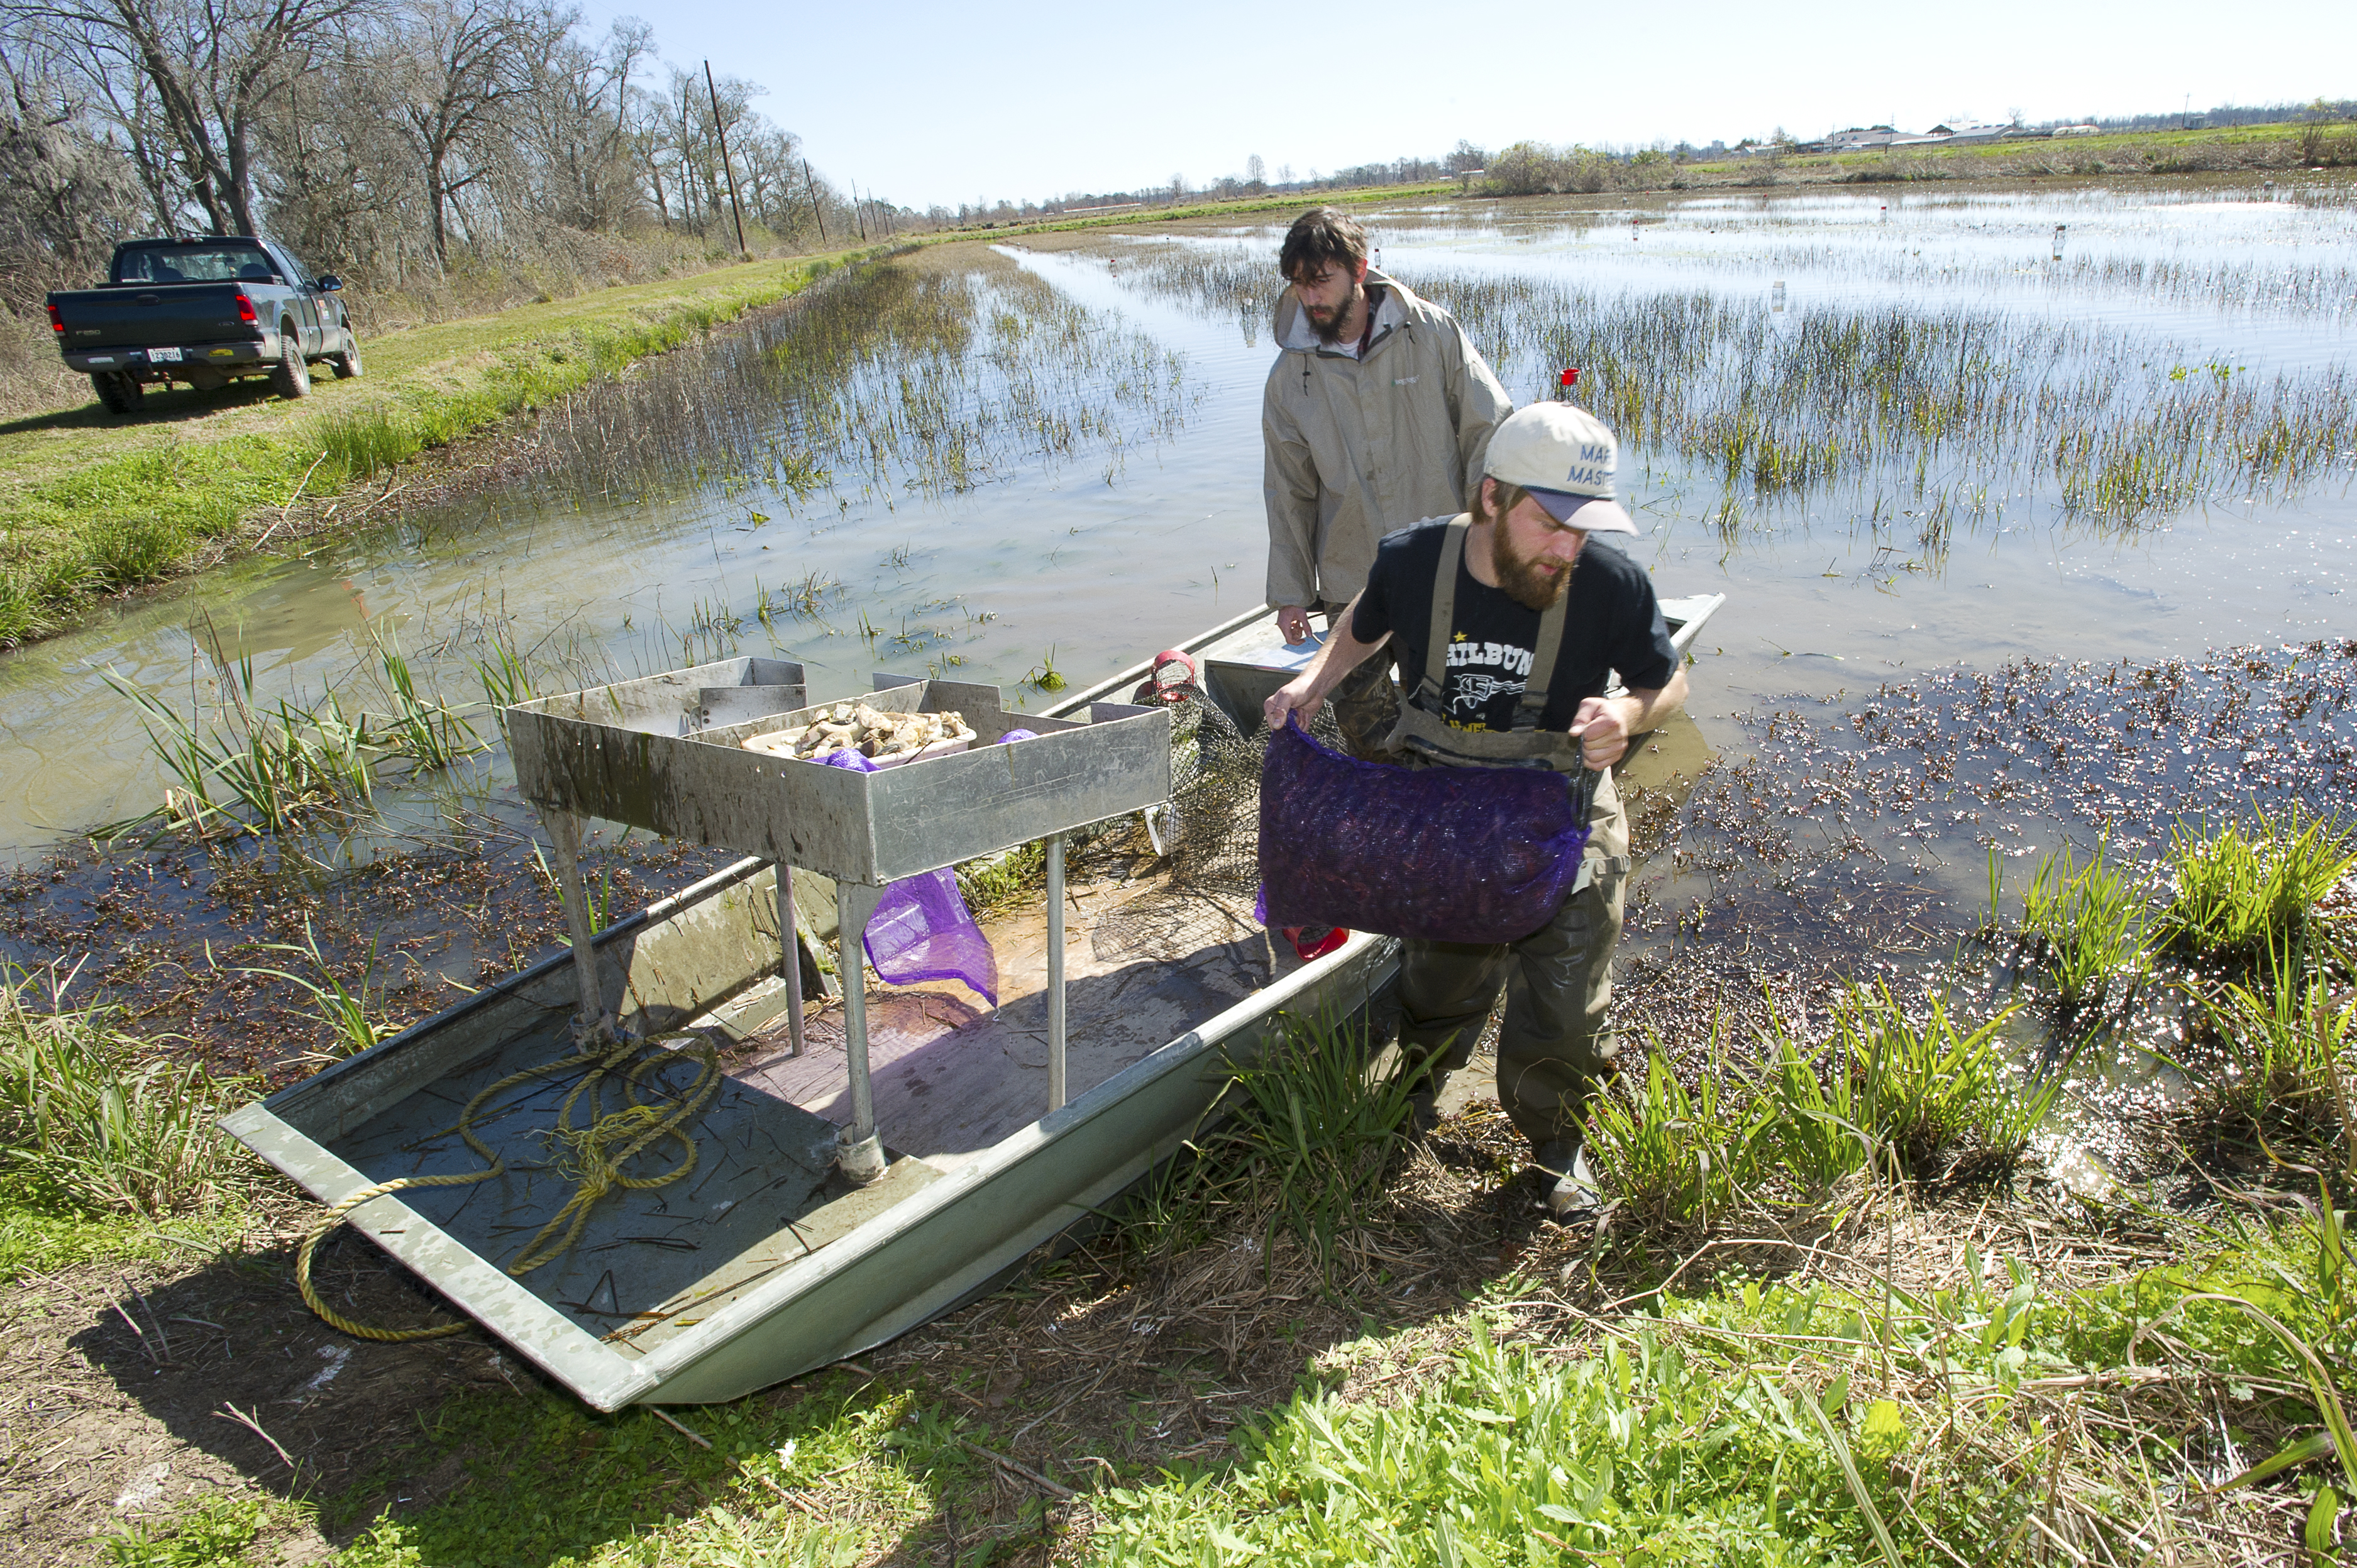 Shelby Hauck and Ryan Williams unload freshly harvested crawfish from a boat at the Aquaculture Research Station on Feb. 5, 2016.